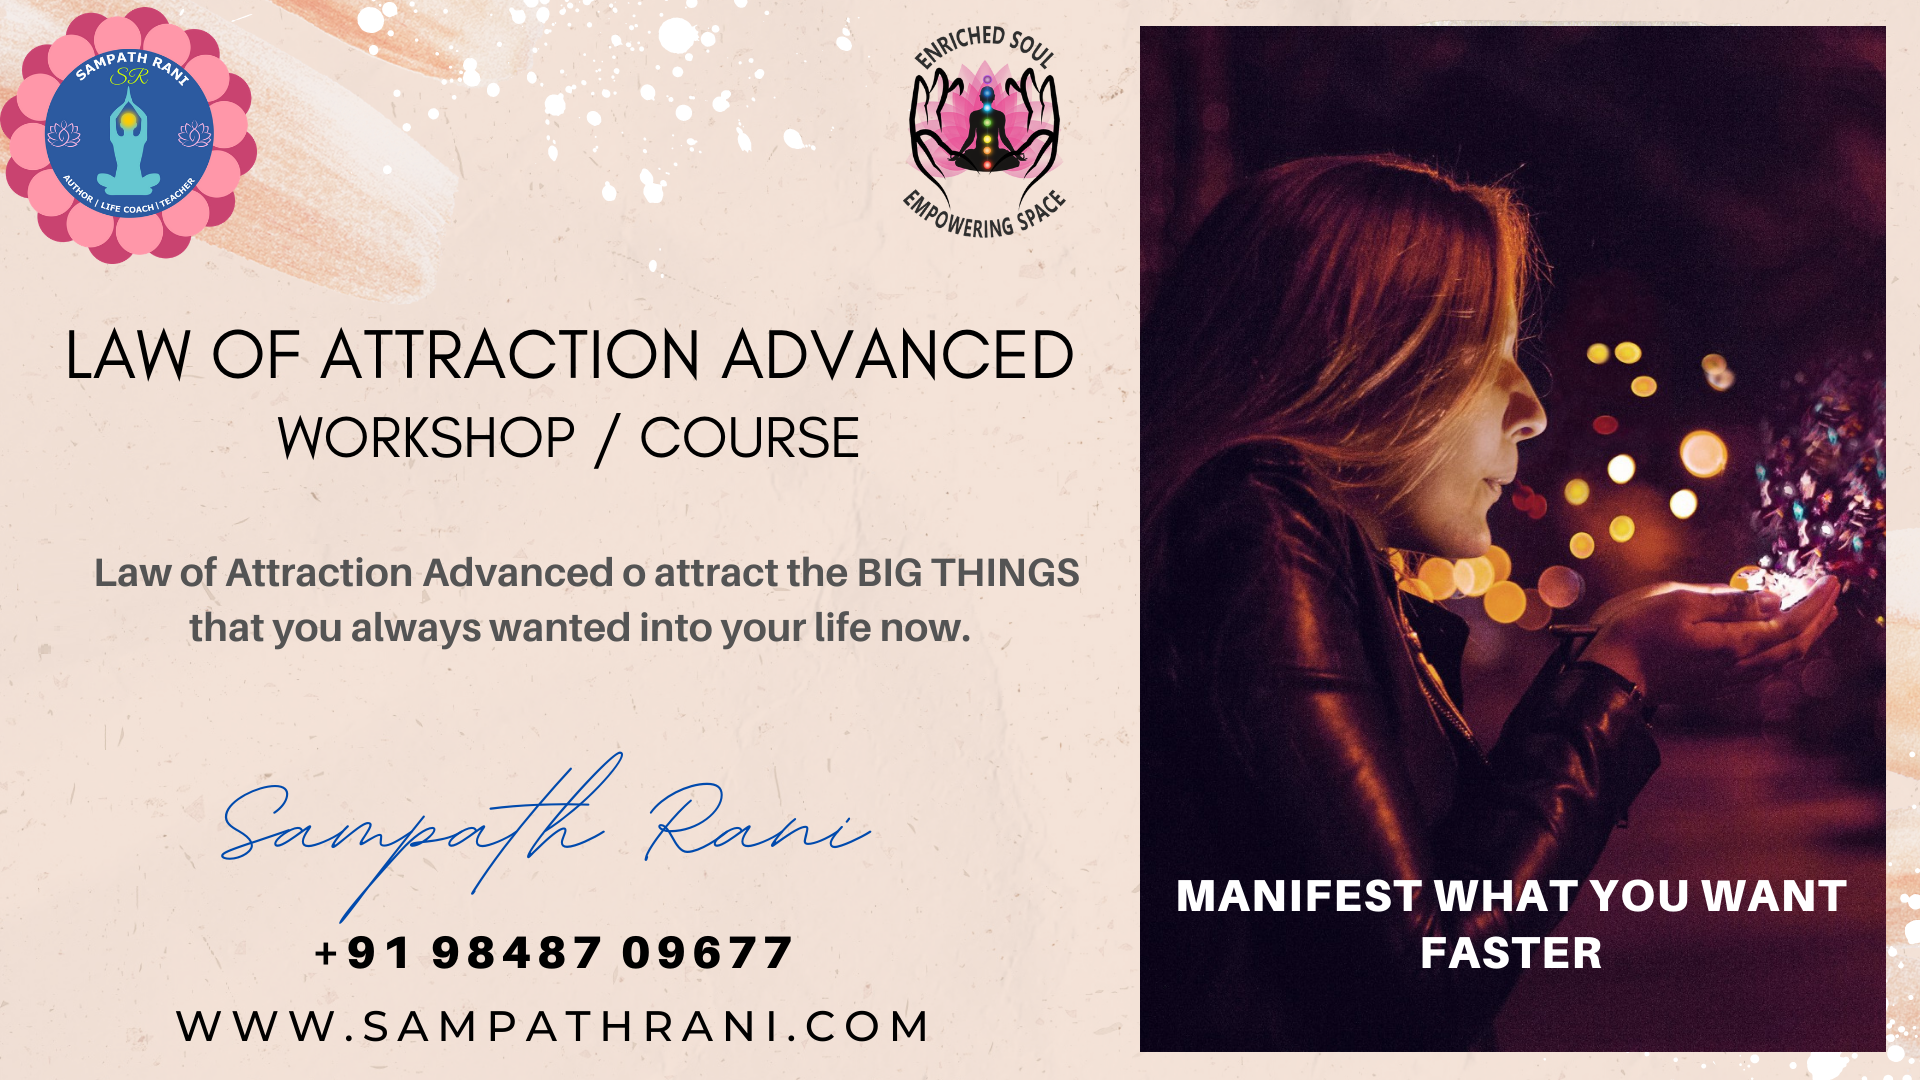 Law of Attraction Advanced Workshop, Course - by Sampath Rani - Bhubaneswar